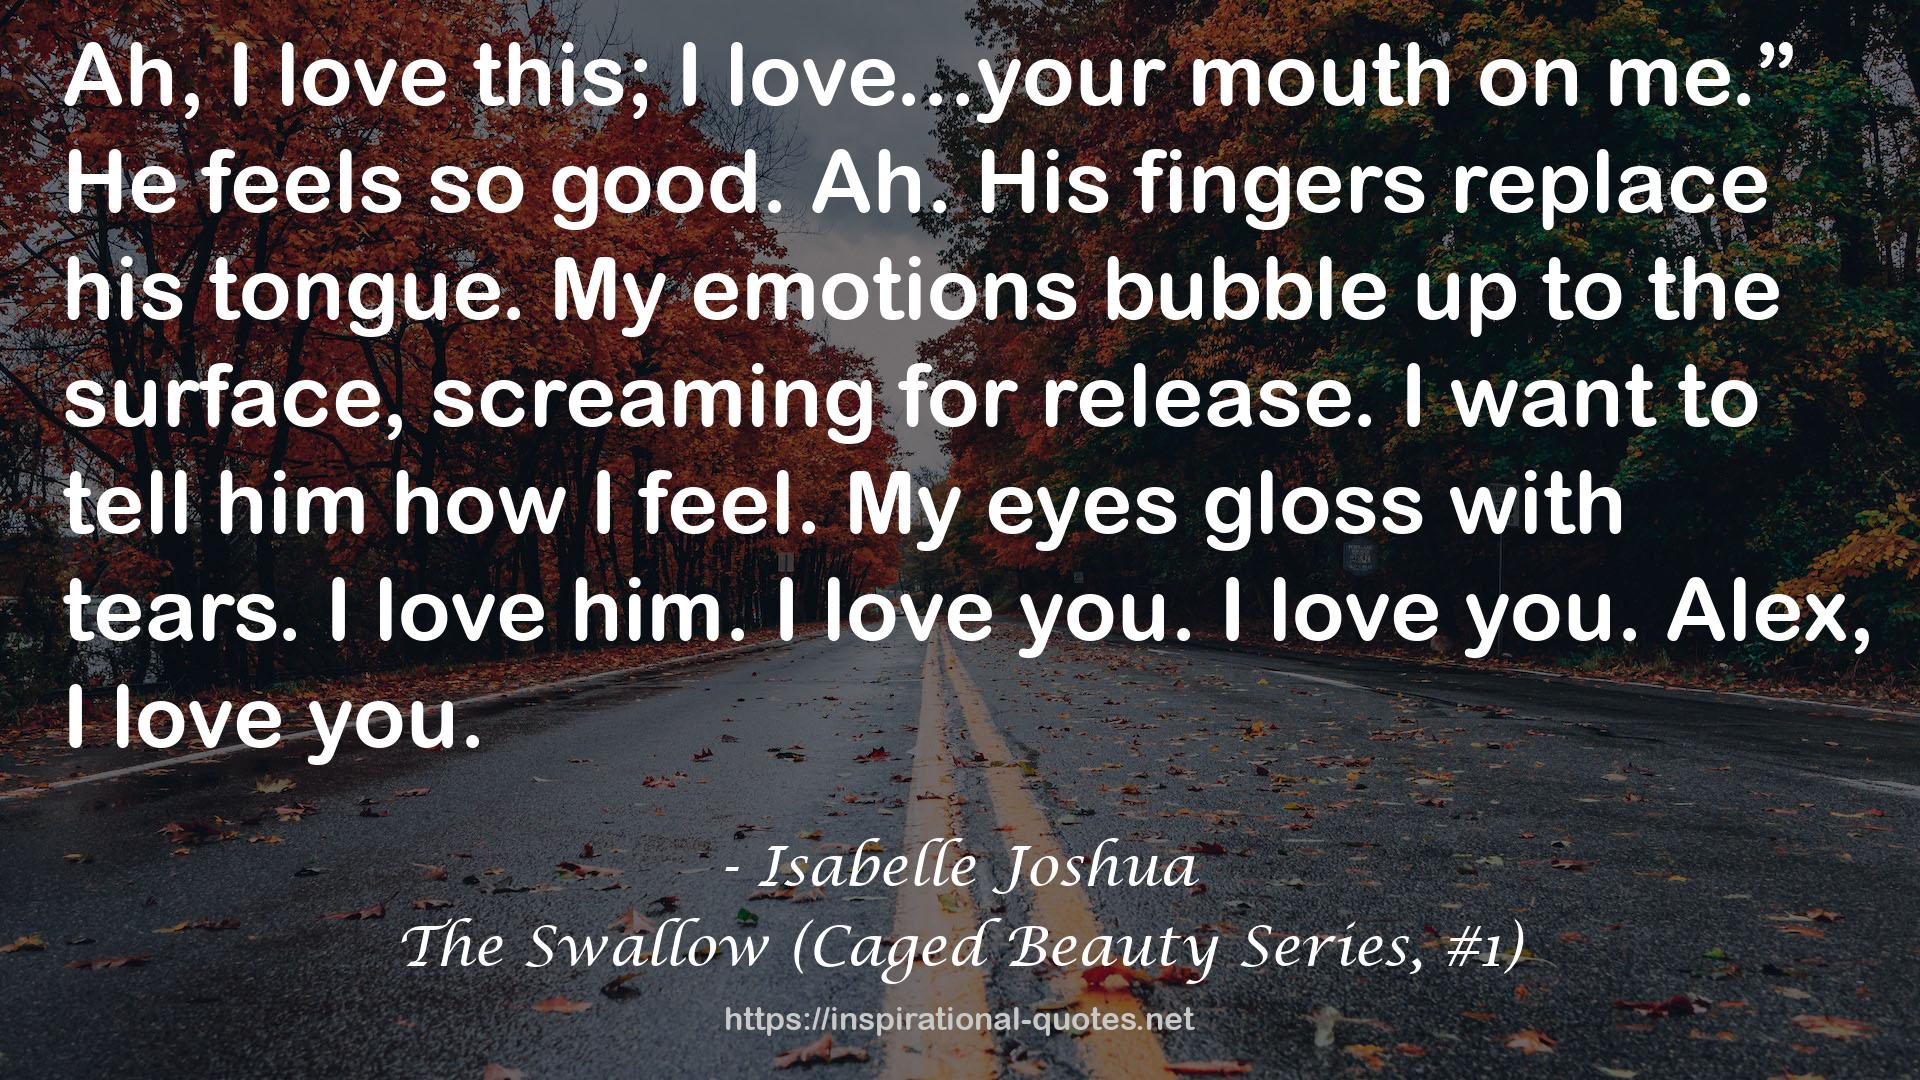 The Swallow (Caged Beauty Series, #1) QUOTES